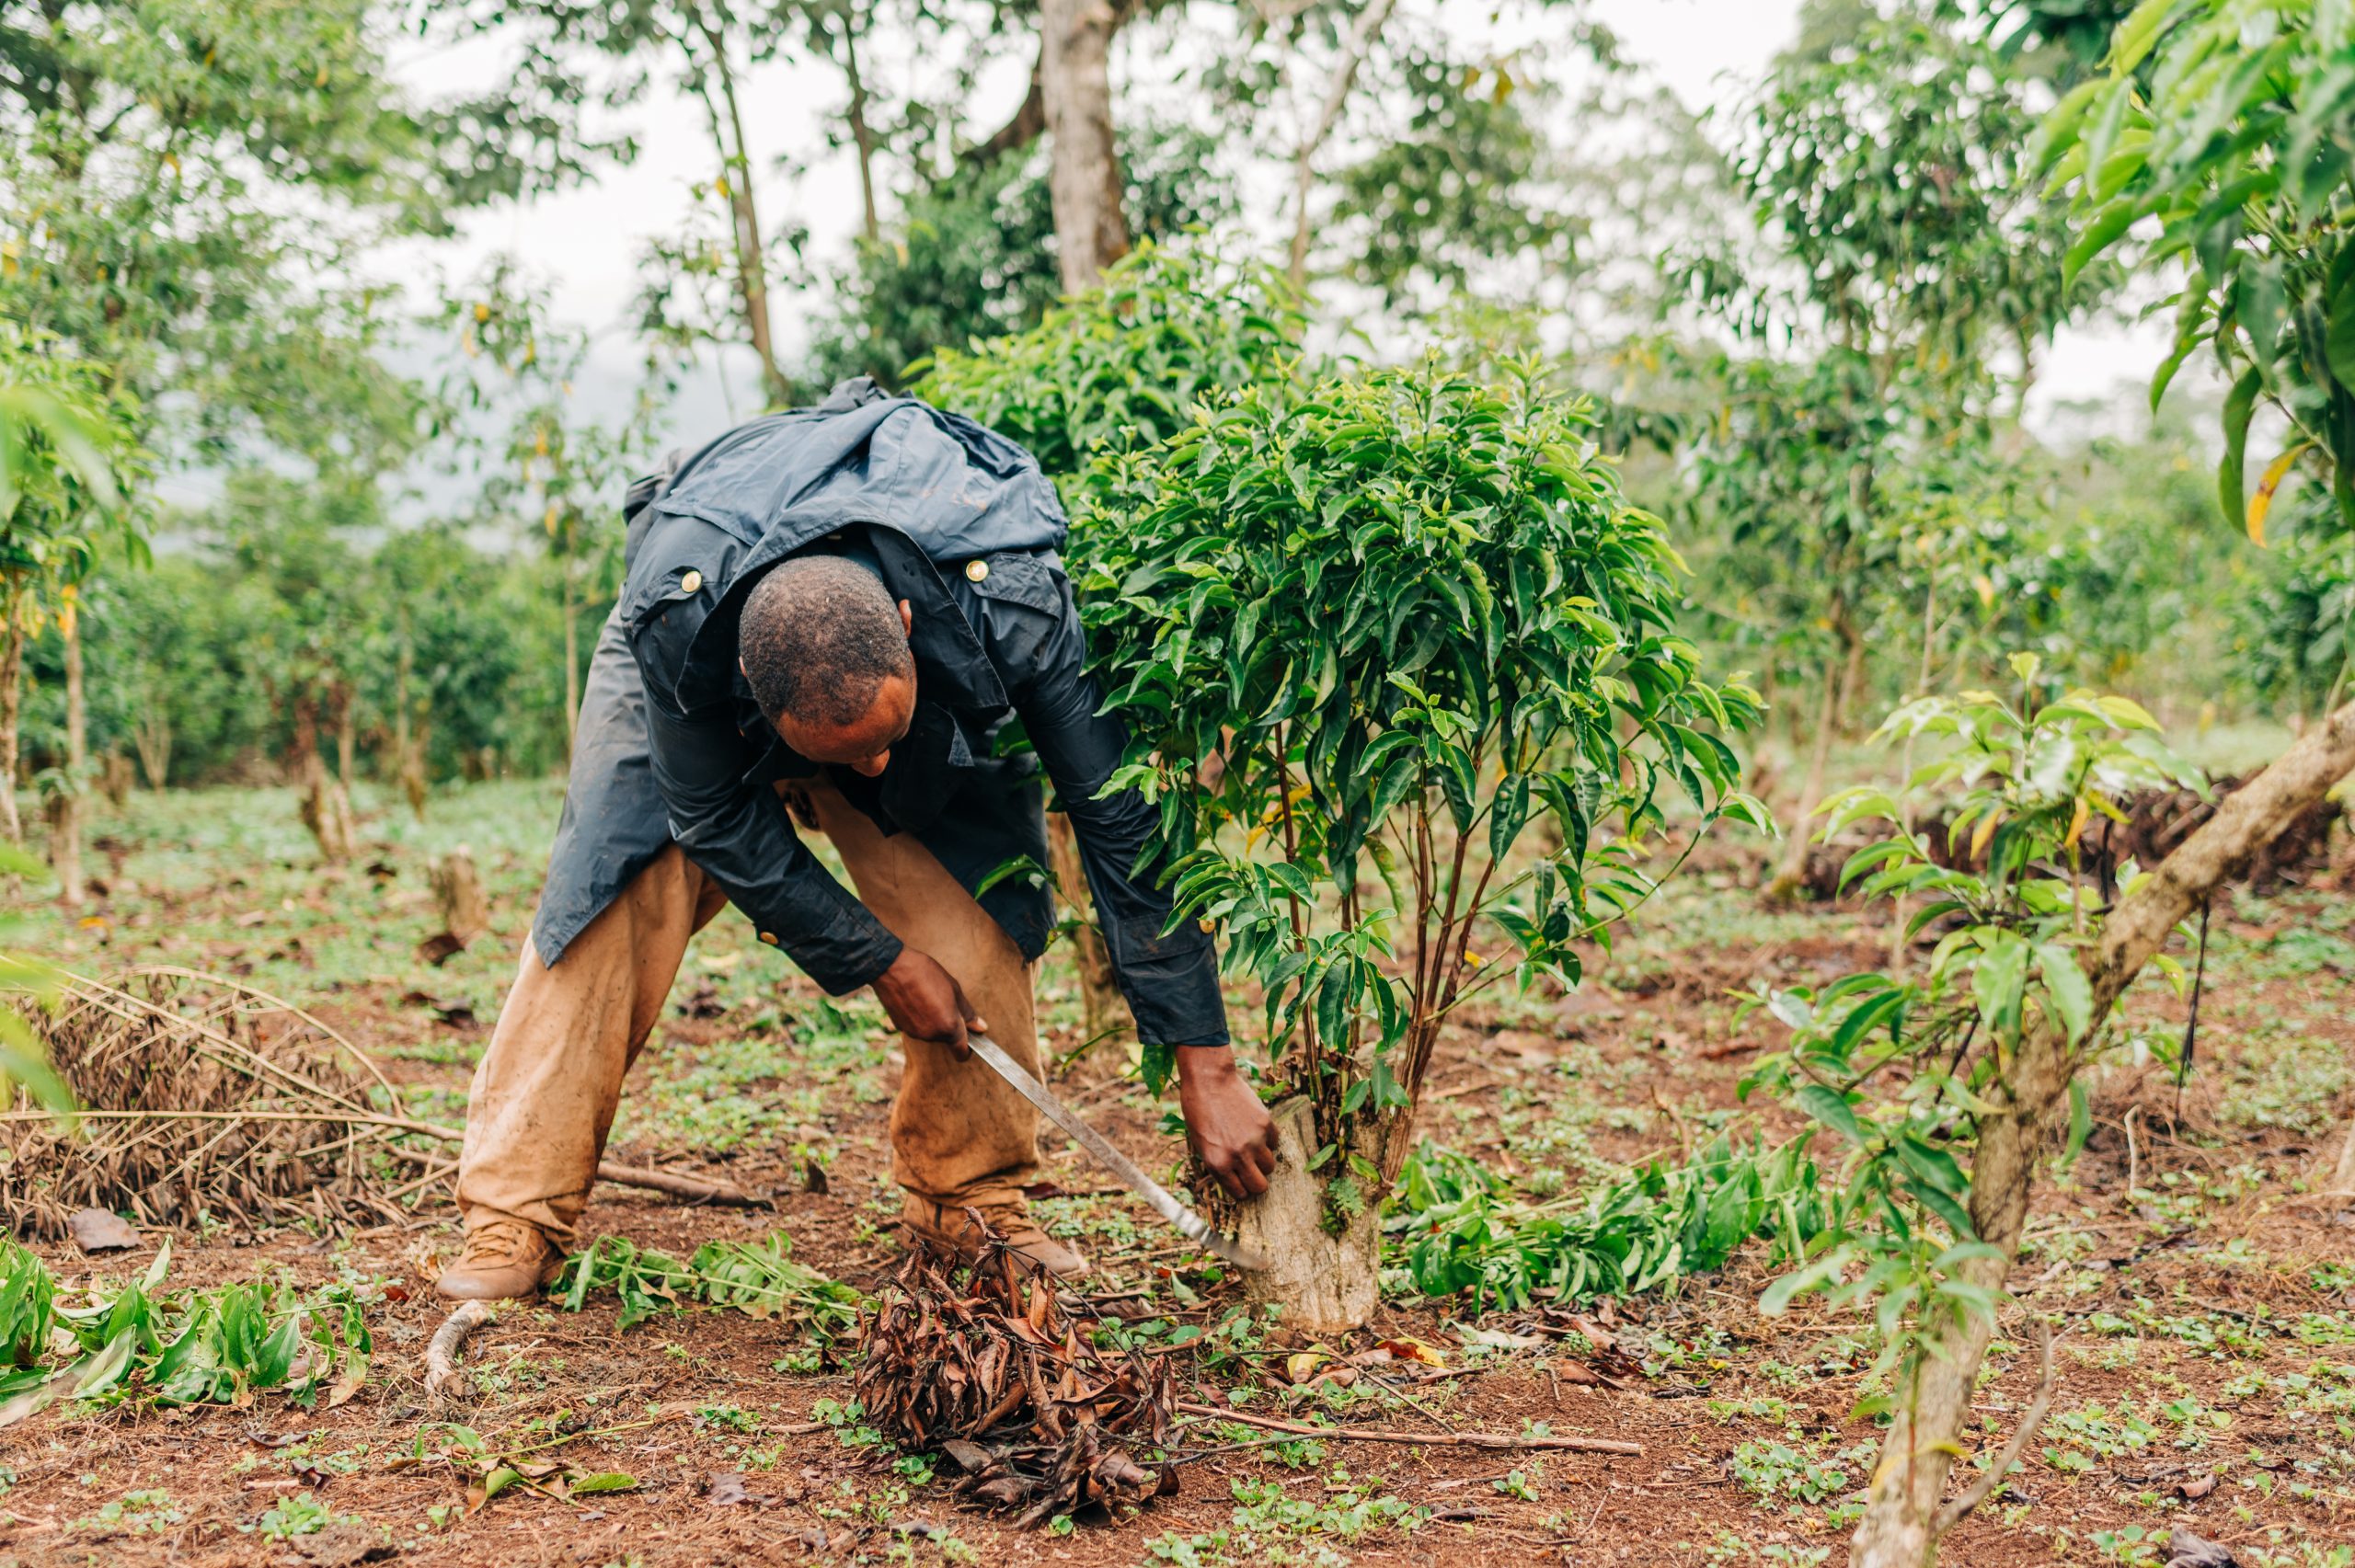 Case Study - Human-Centered Design - A coffee farmer in Ethiopia tends to his coffee trees.